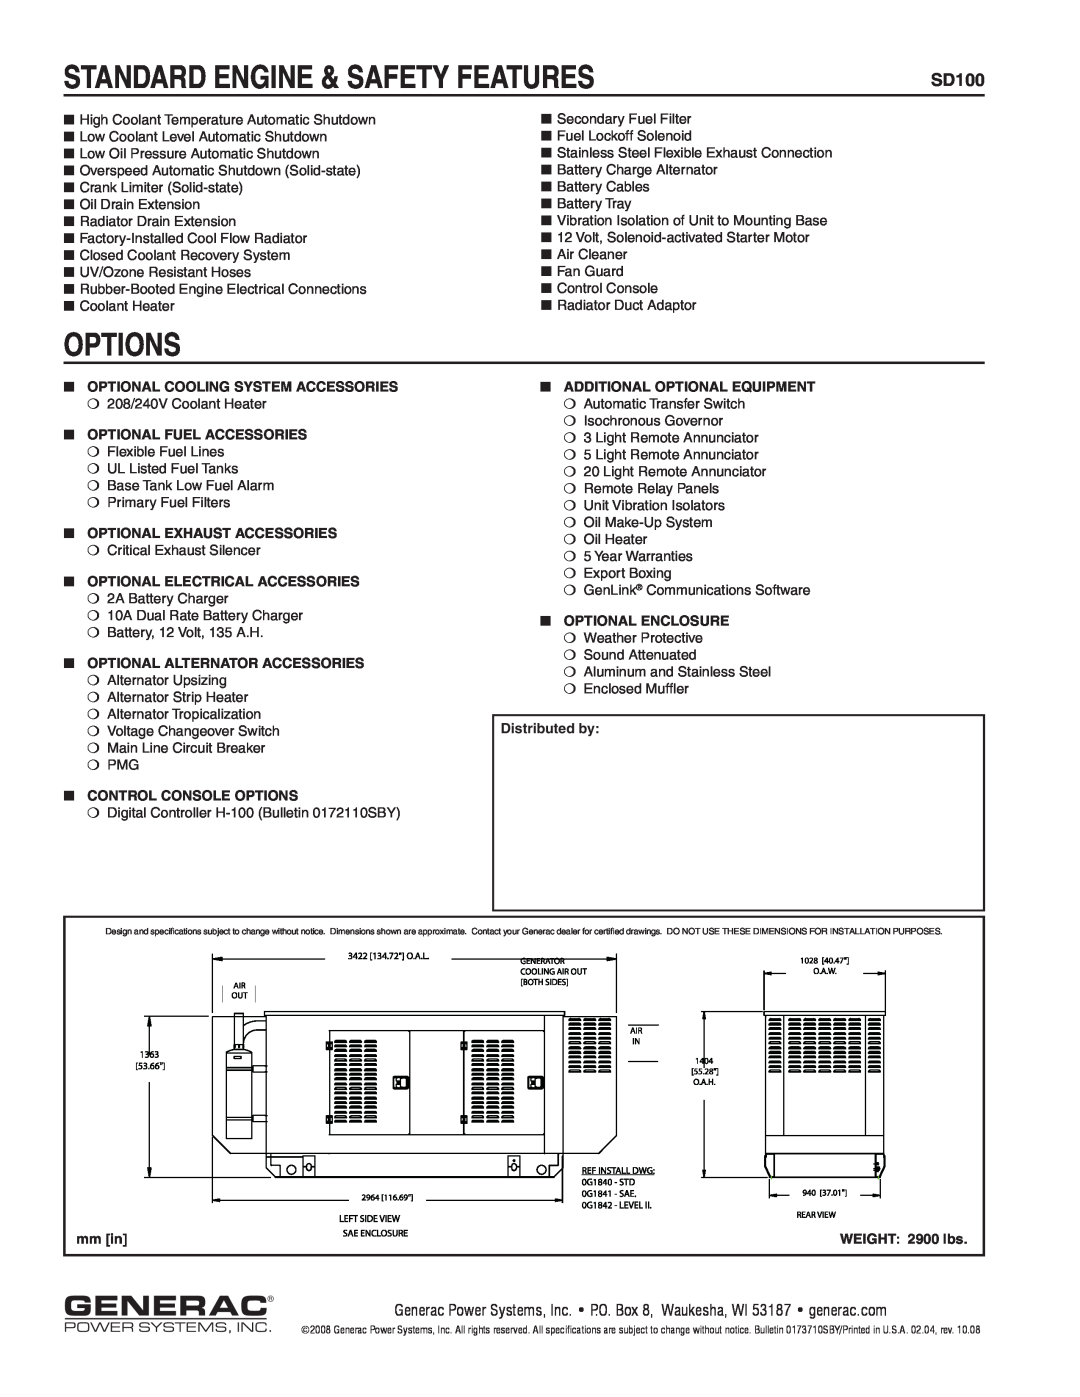 Generac SD100 manual Standard Engine & Safety Features, Options 